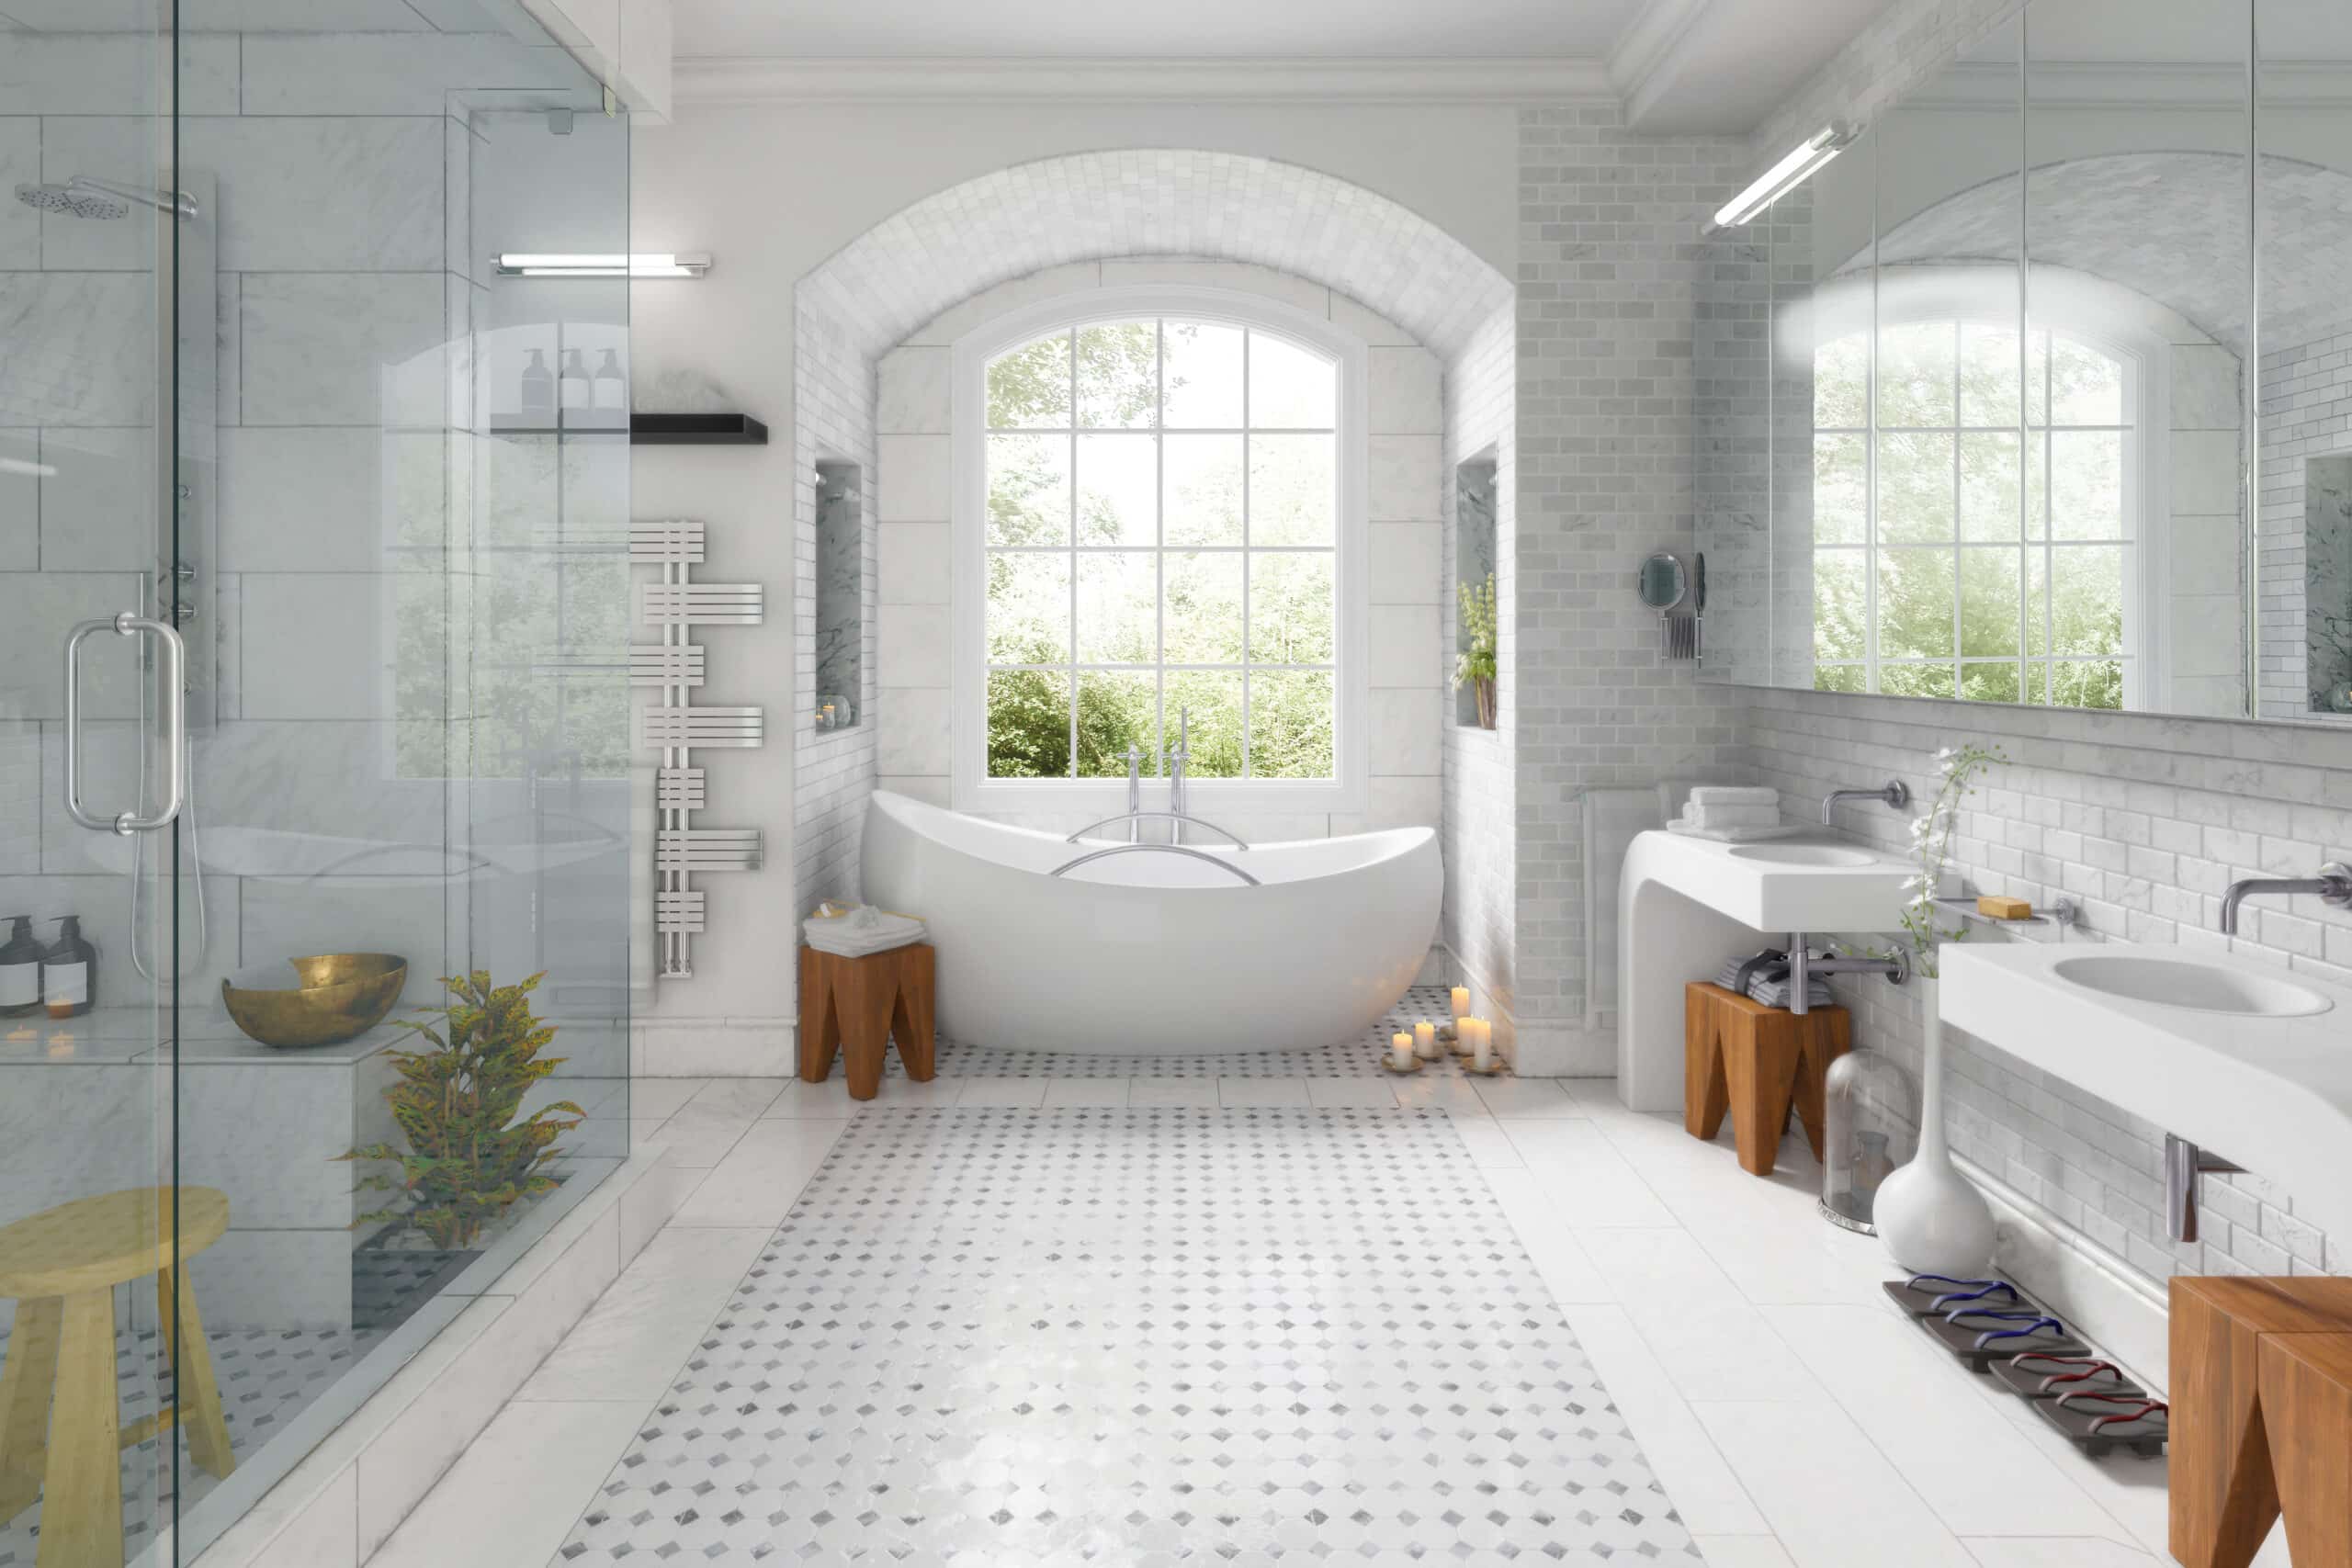 Spacious white bathroom design using marble and stone tiles for its flooring and surround